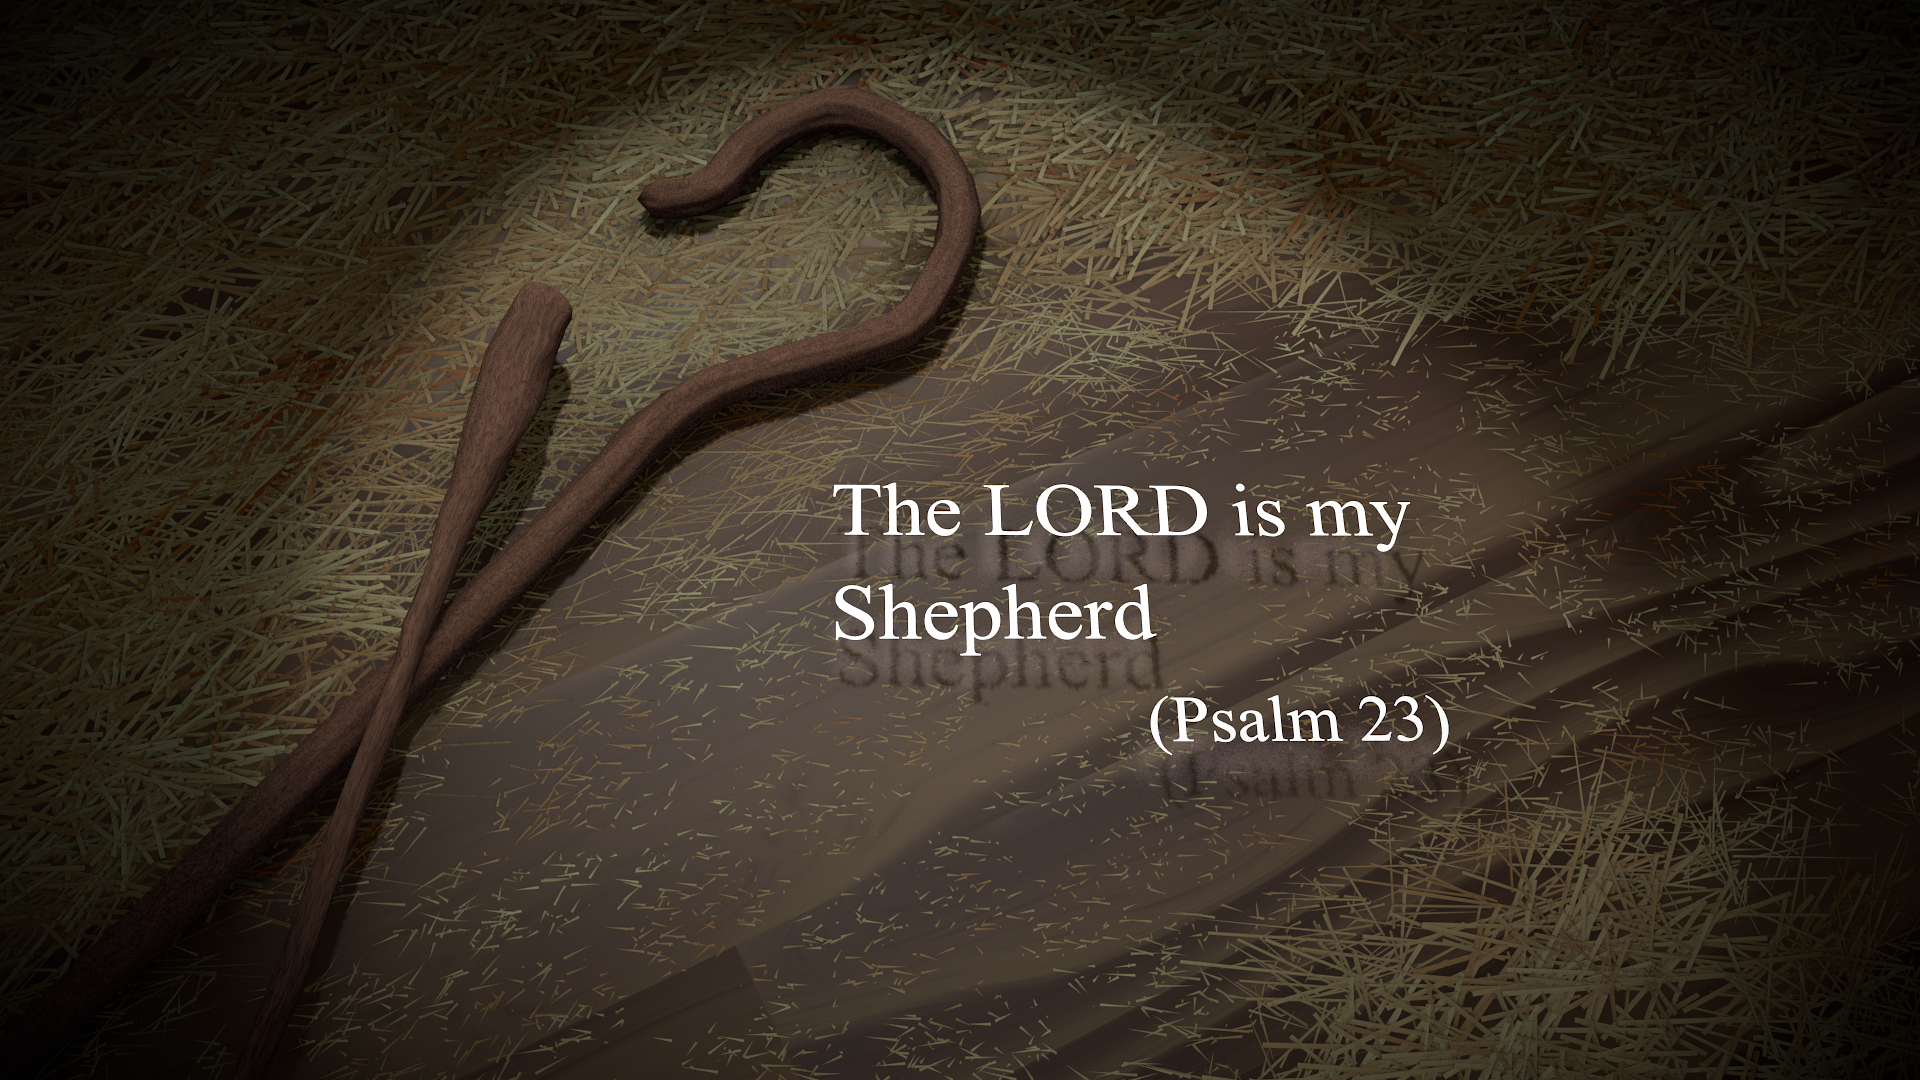 Making the Lord Personal by Acknowledging Him as Your Shepherd. Albany Church of Christ